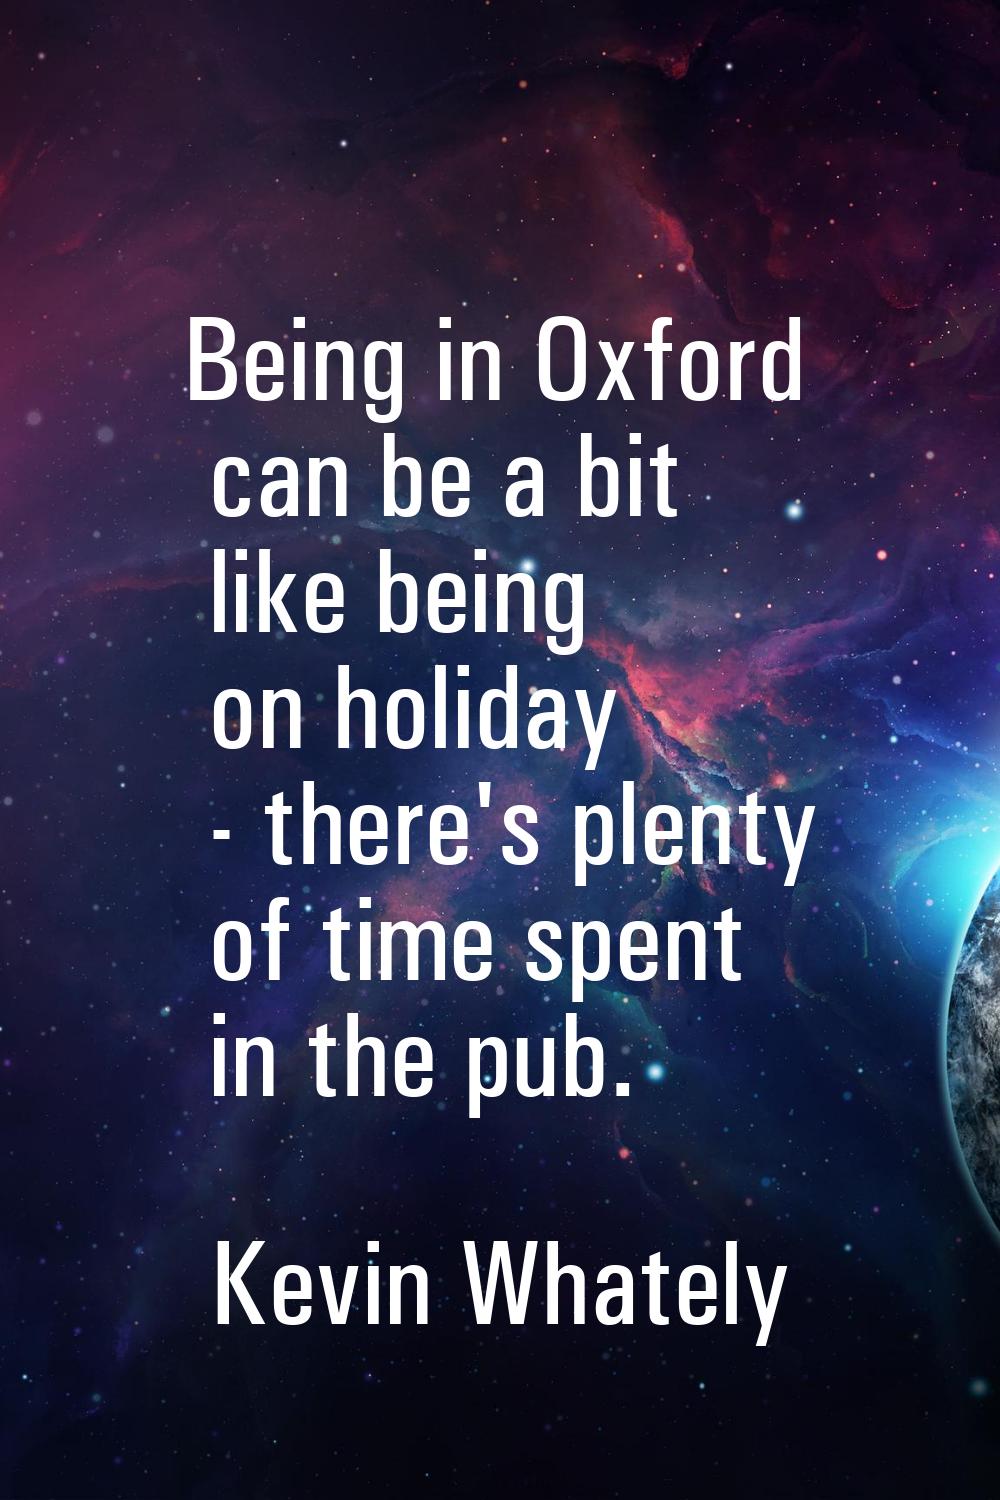 Being in Oxford can be a bit like being on holiday - there's plenty of time spent in the pub.